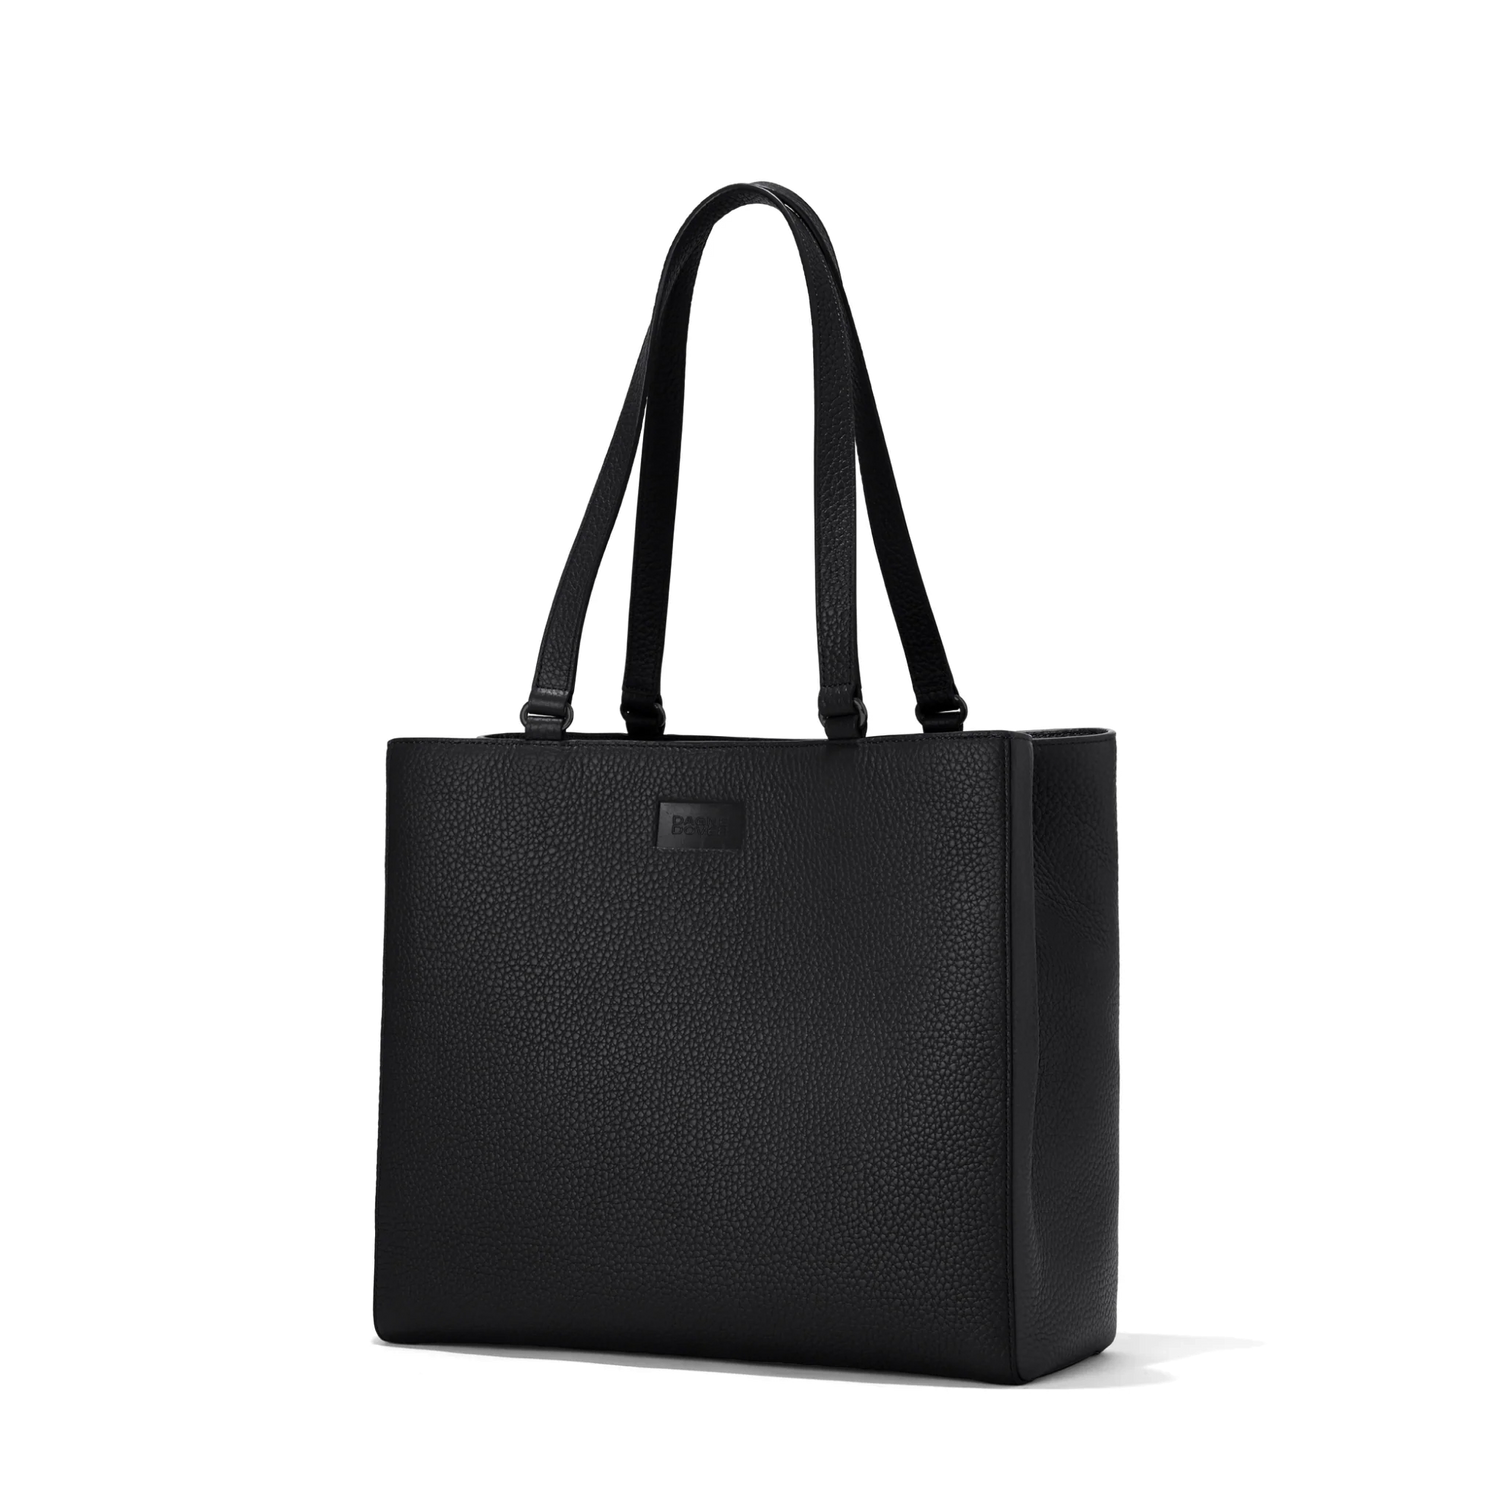 Allyn Tote - Leather Tote for Work & Weekends | Dagne Dover